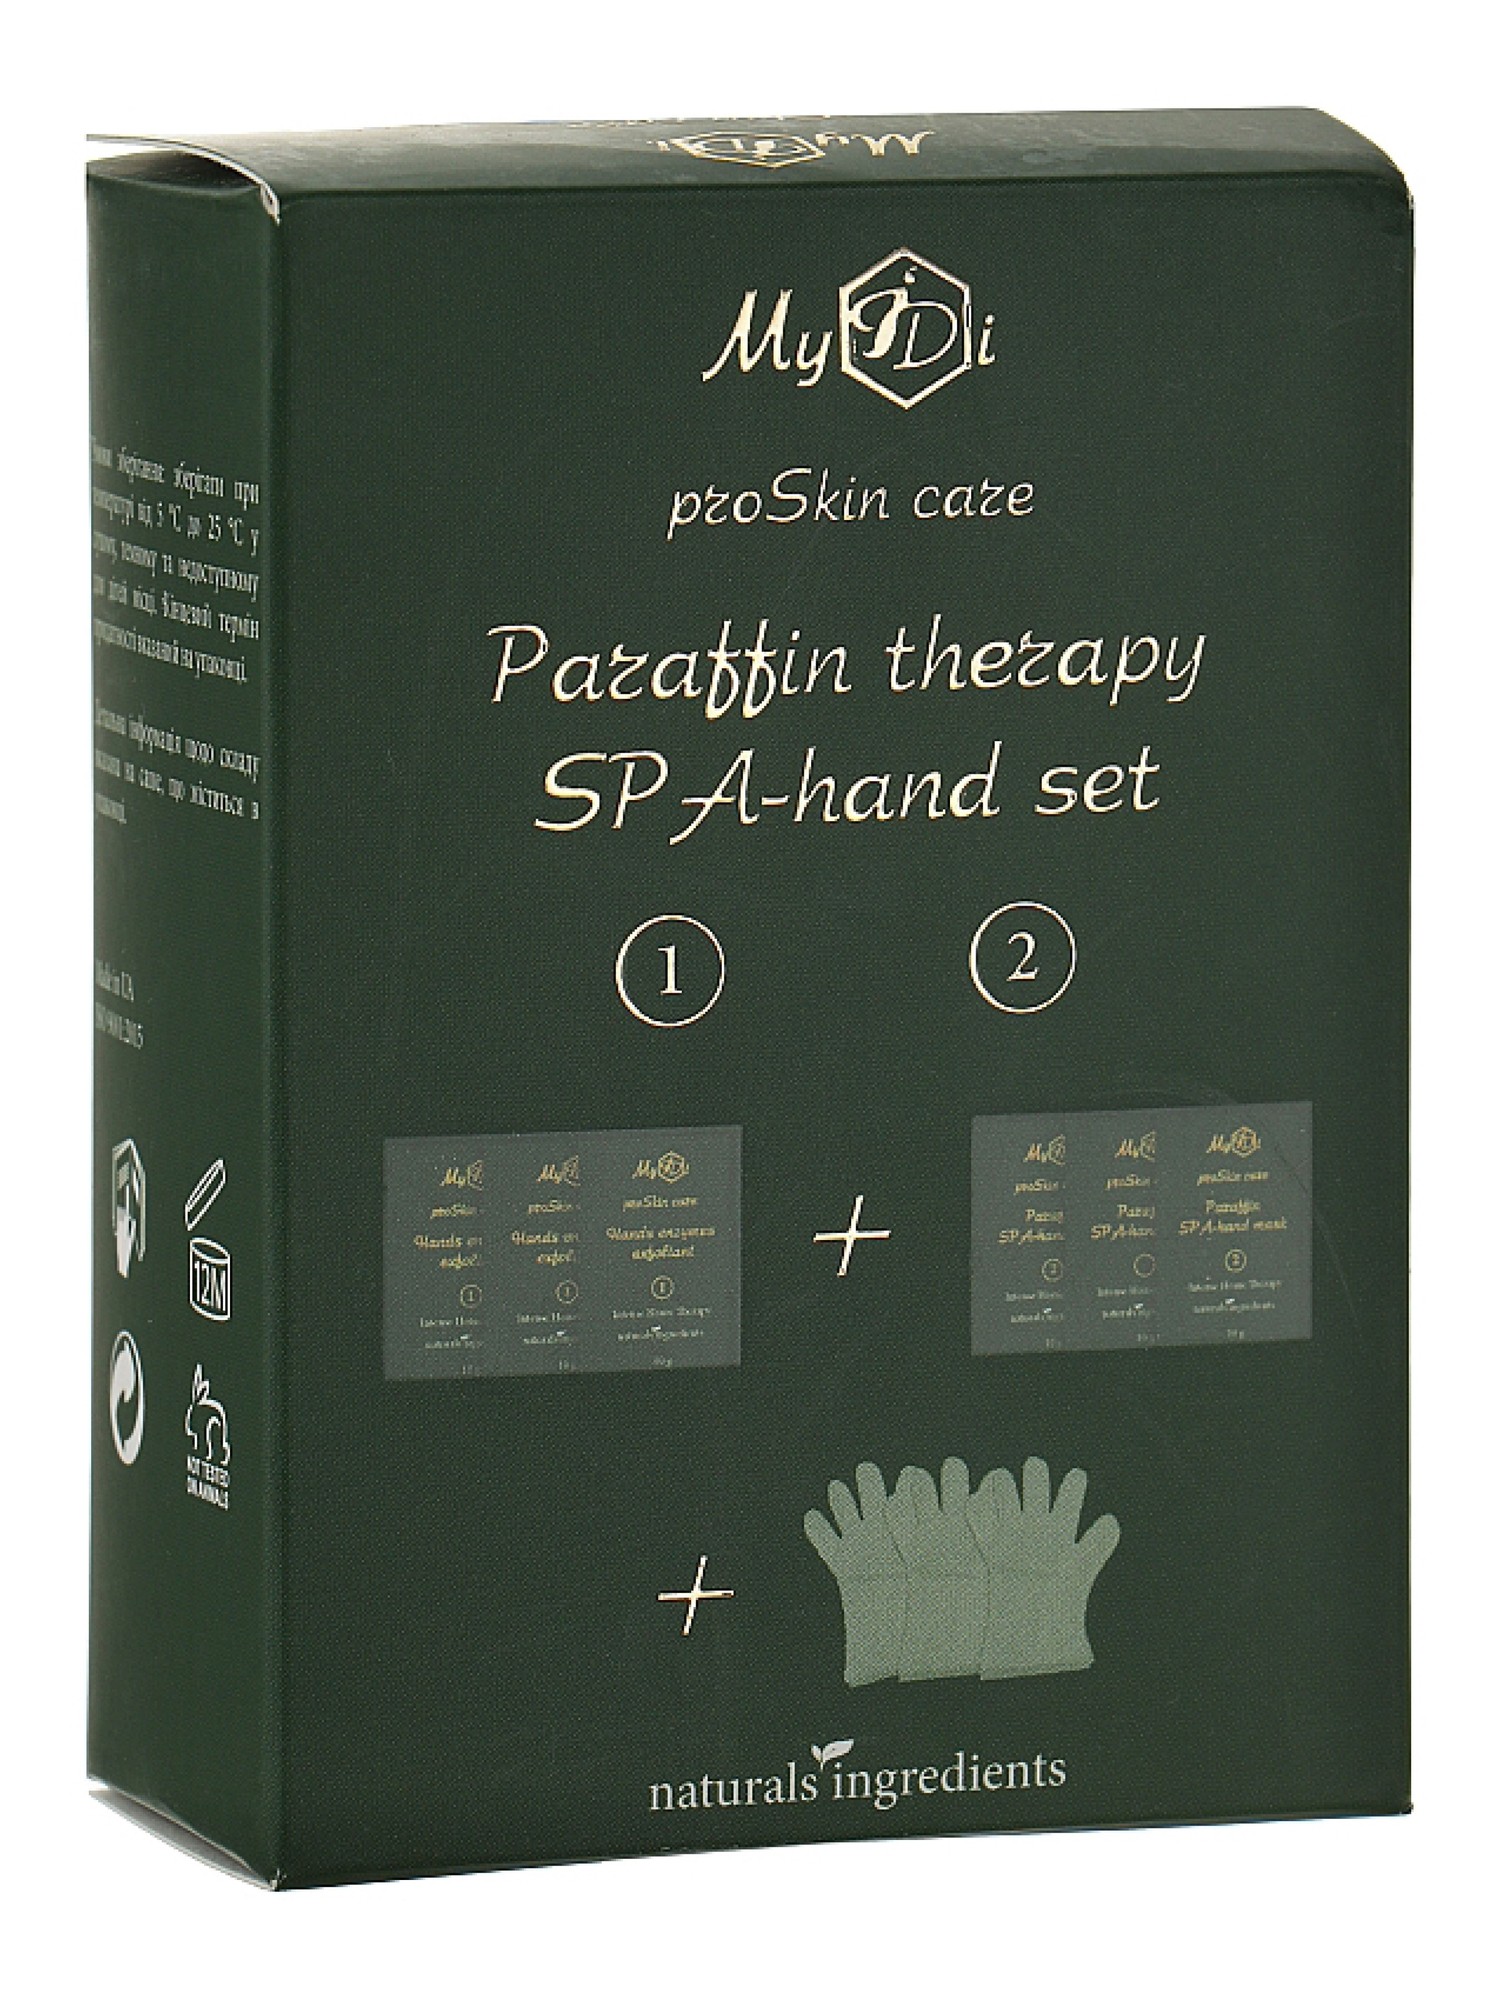 Paraffin therapy SPA-hand set